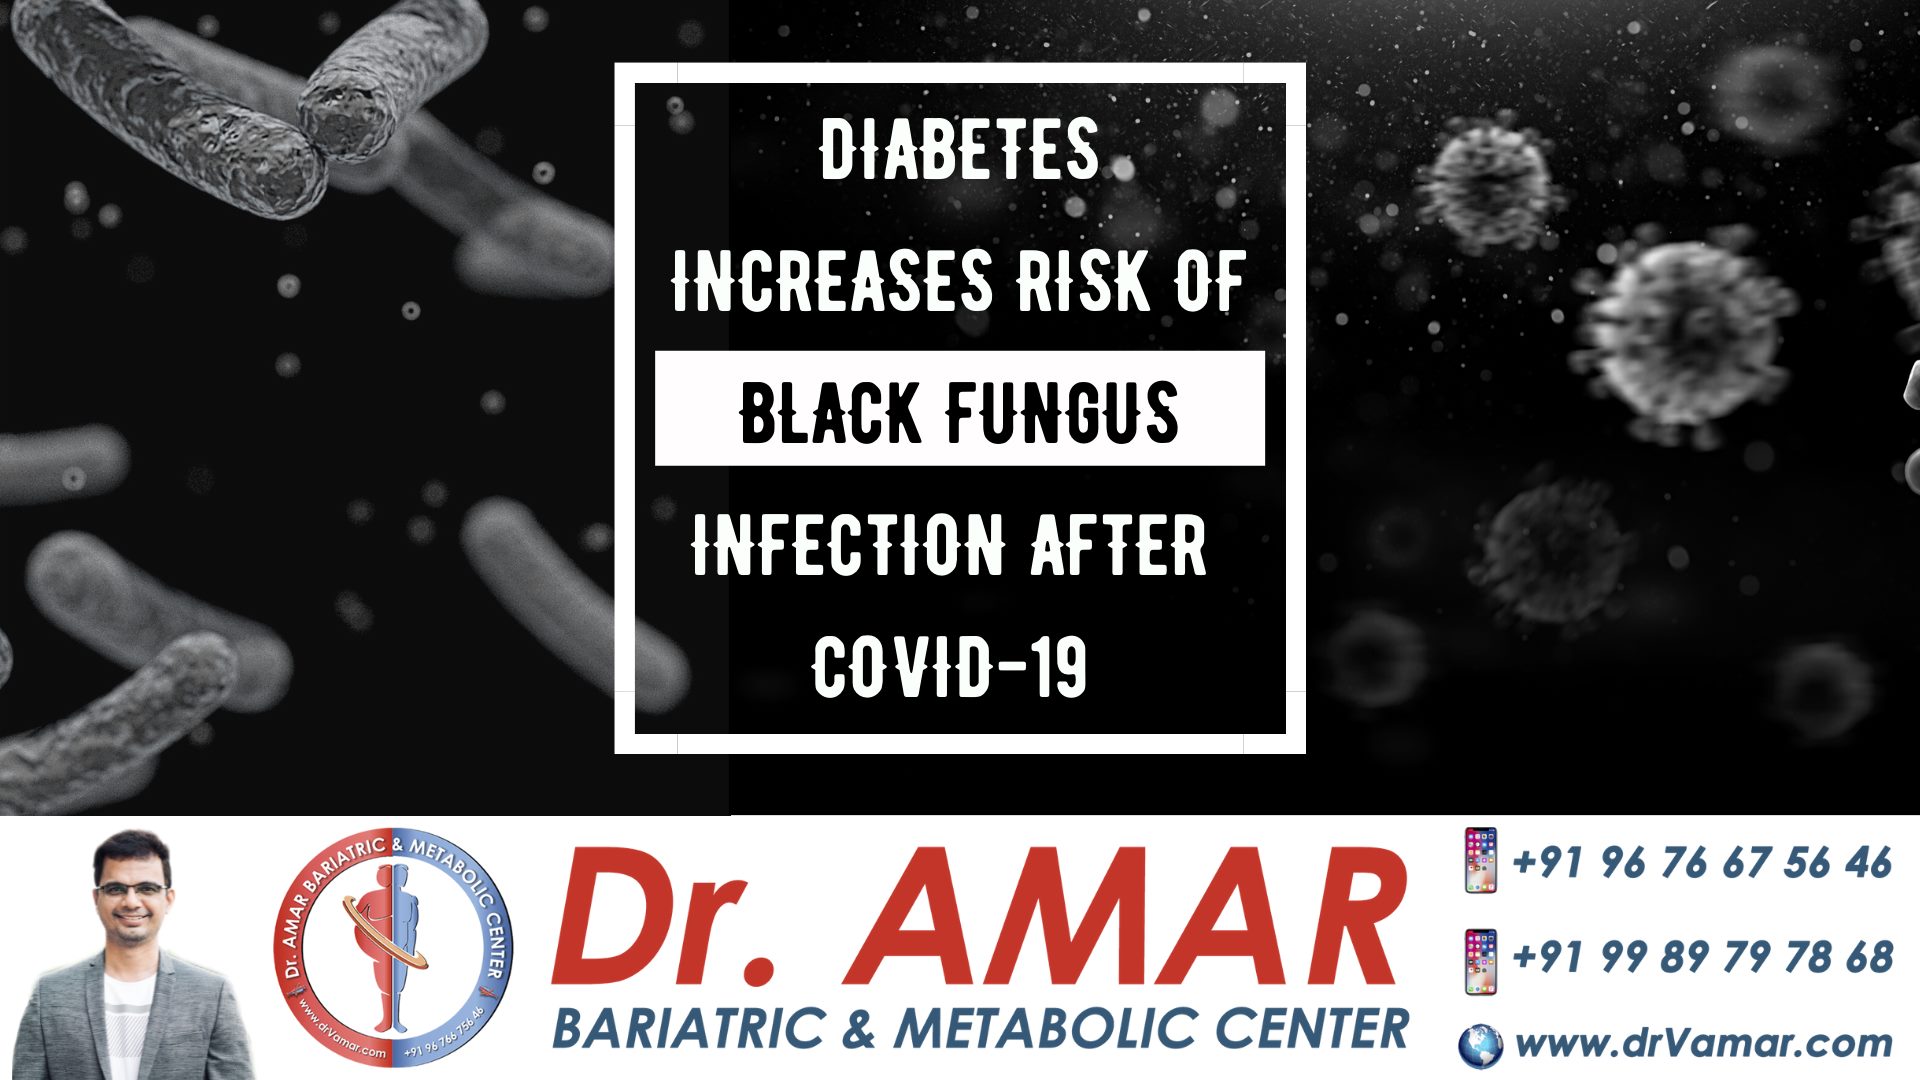 Diabetes increases risk of black fungus infection after Covid-19